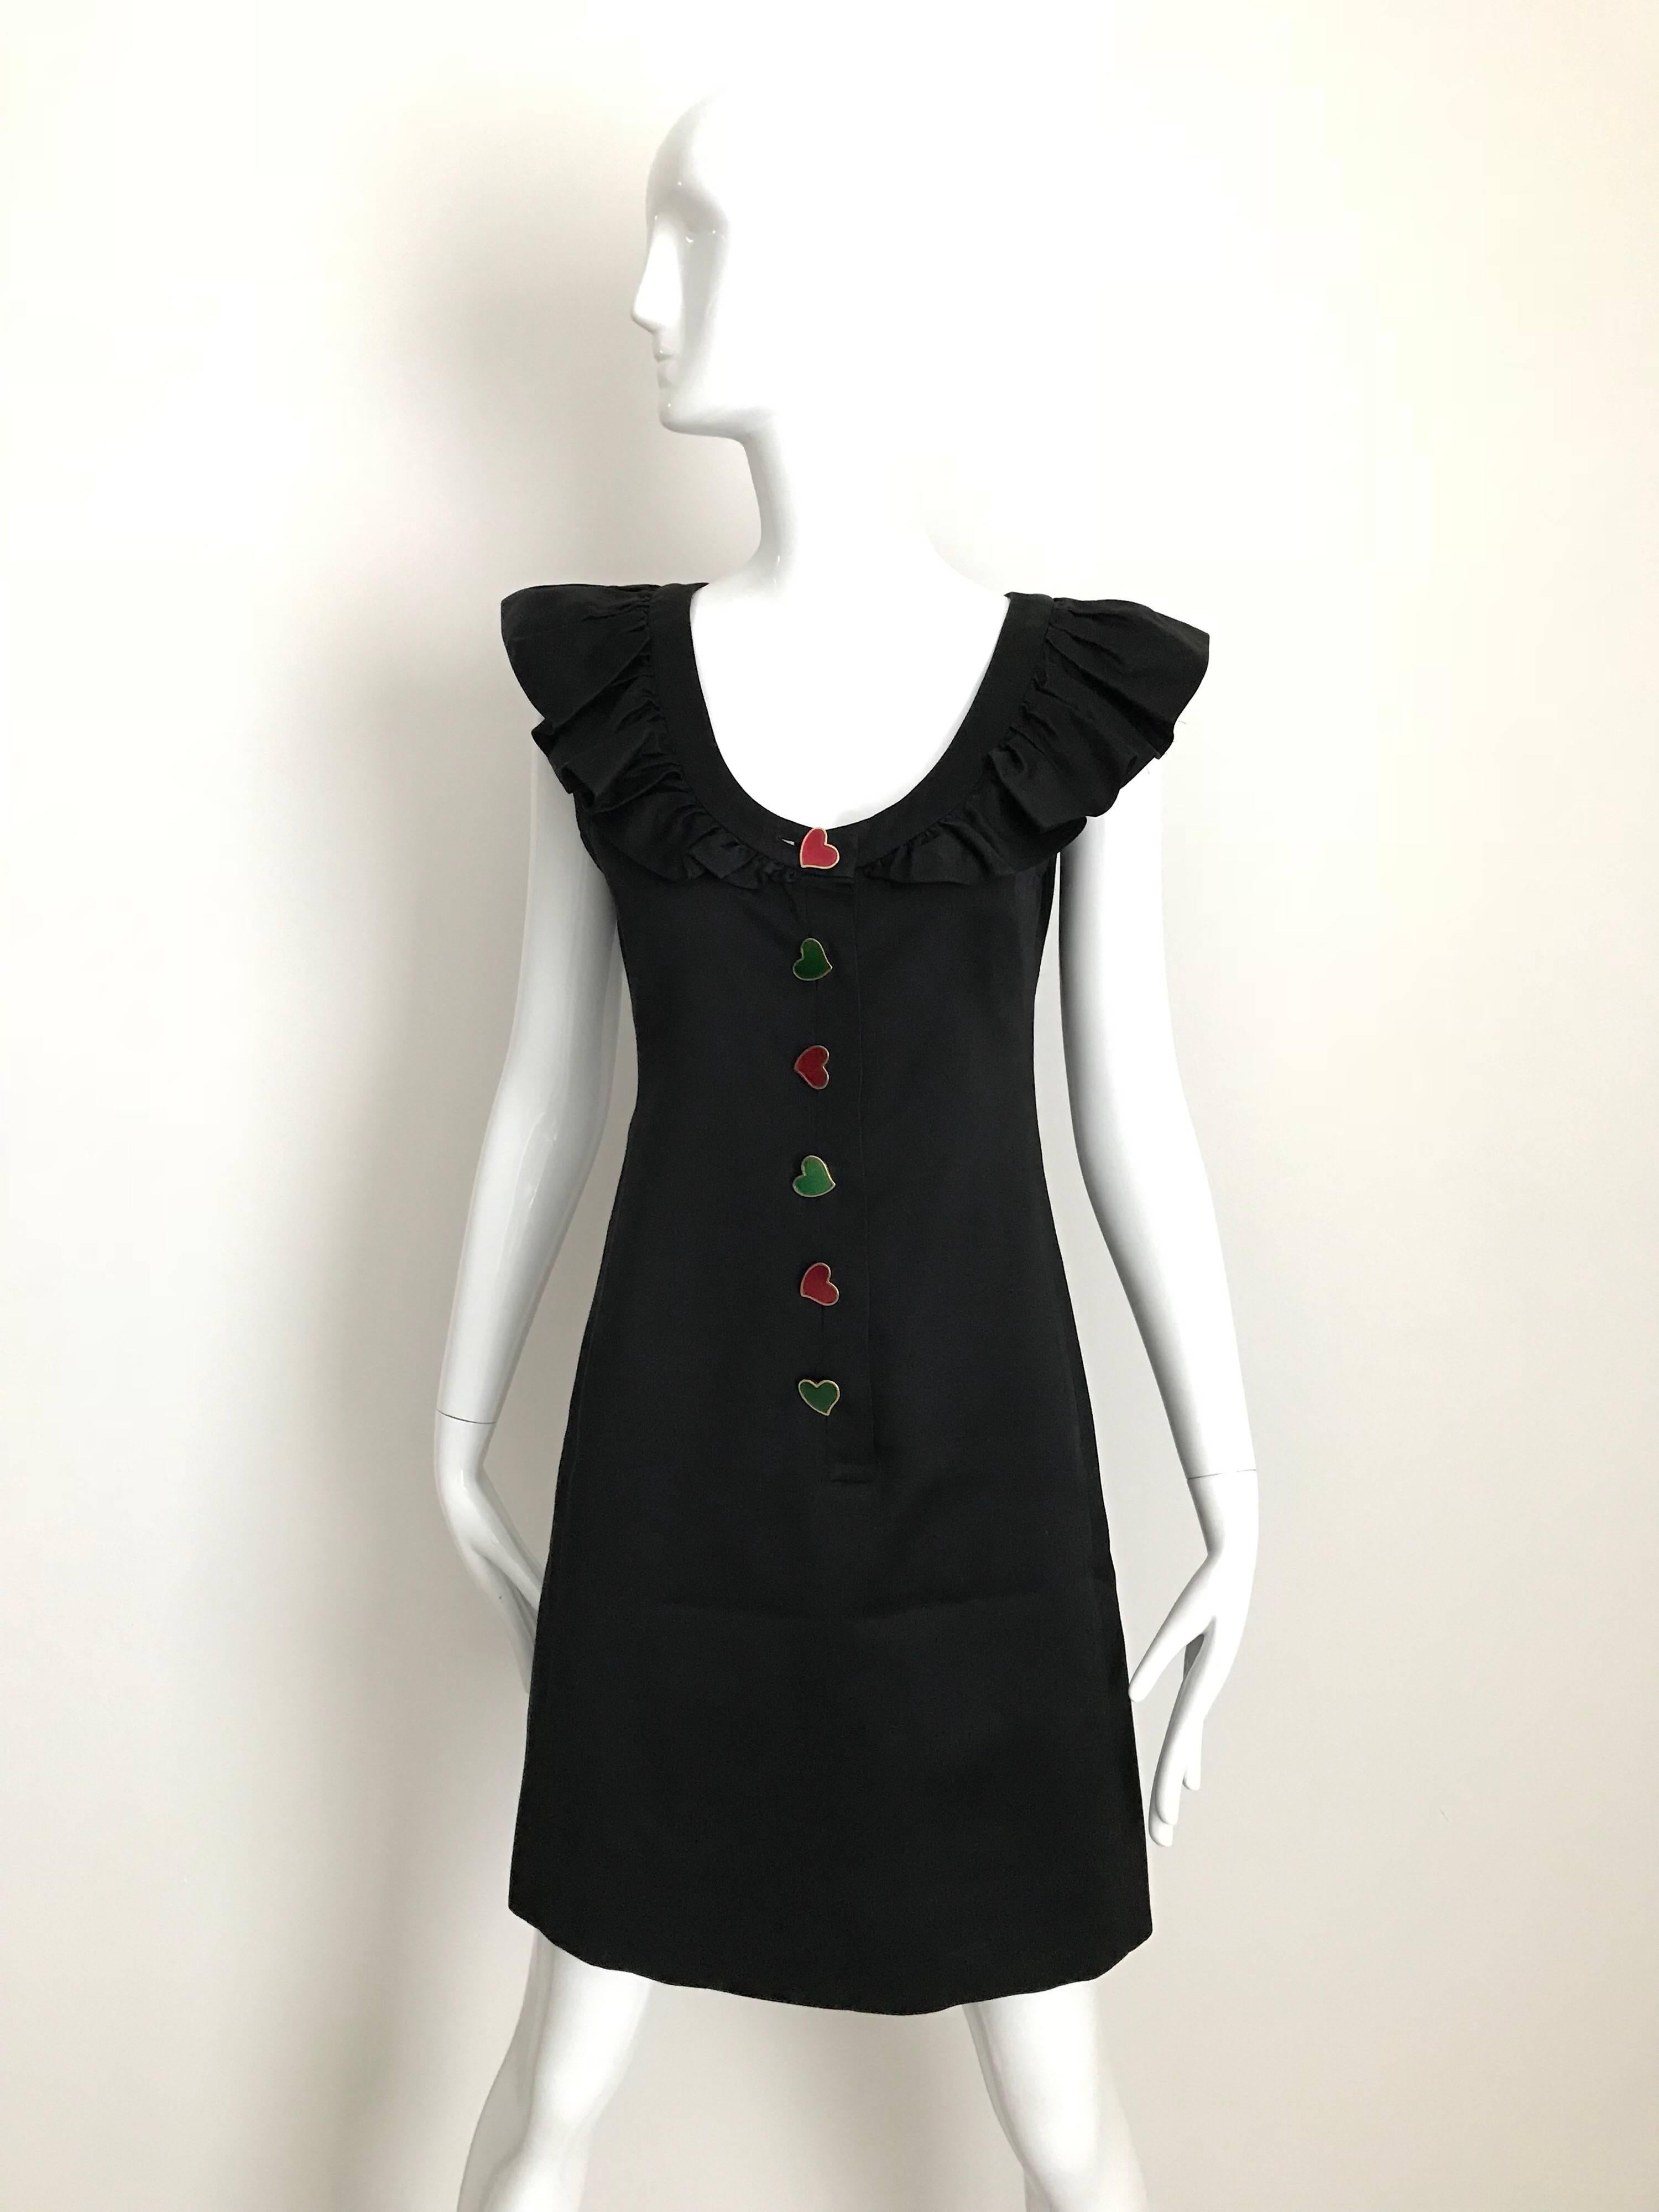 Yves Saint Laurent Black Cotton Dress with Colorful Heart Buttons, 1980s For Sale 1